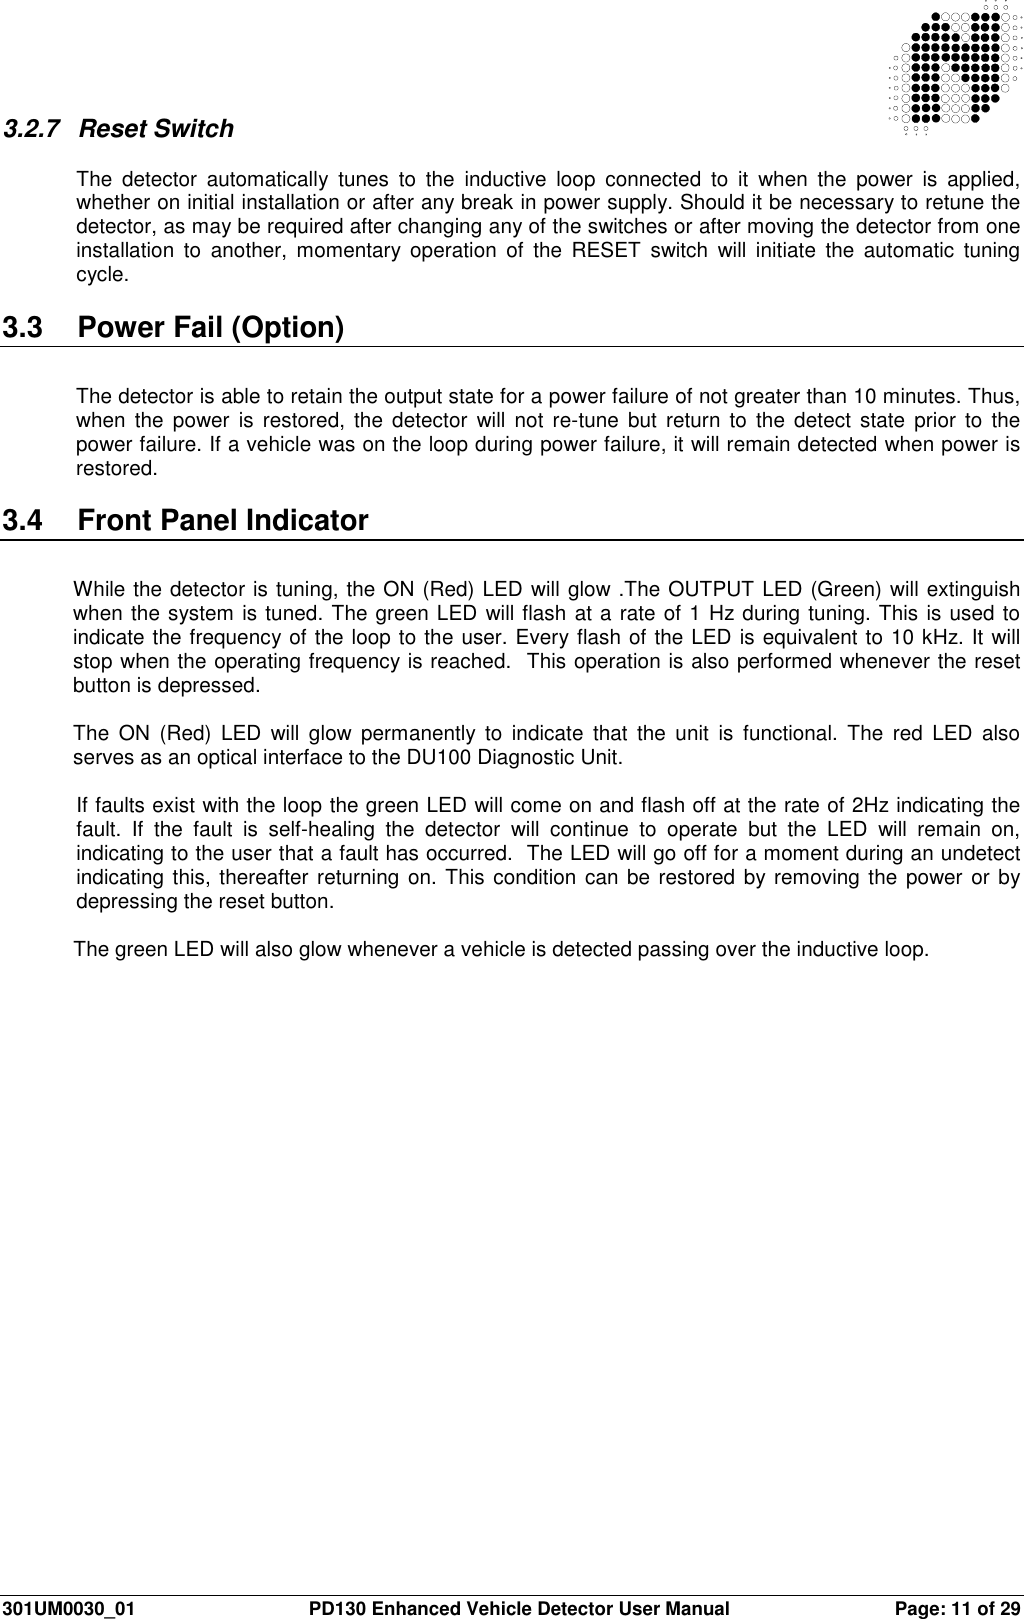  301UM0030_01  PD130 Enhanced Vehicle Detector User Manual  Page: 11 of 29   3.2.7  Reset Switch  The  detector  automatically  tunes  to  the  inductive  loop  connected  to  it  when  the  power  is  applied, whether on initial installation or after any break in power supply. Should it be necessary to retune the detector, as may be required after changing any of the switches or after moving the detector from one installation  to  another,  momentary  operation  of  the  RESET  switch  will  initiate  the  automatic  tuning cycle.  3.3  Power Fail (Option)  The detector is able to retain the output state for a power failure of not greater than 10 minutes. Thus, when  the power  is  restored,  the  detector  will  not  re-tune  but  return to  the  detect  state  prior  to the power failure. If a vehicle was on the loop during power failure, it will remain detected when power is restored.  3.4  Front Panel Indicator  While the detector is tuning, the ON (Red) LED will glow .The OUTPUT LED (Green) will extinguish when the system is tuned. The green LED will flash at a rate of 1 Hz during tuning. This is used to indicate the frequency of the loop to the user. Every flash of the LED is equivalent to 10 kHz. It will stop when the operating frequency is reached.  This operation is also performed whenever the reset button is depressed.  The  ON  (Red)  LED  will  glow  permanently  to  indicate  that  the  unit  is  functional.  The  red  LED  also serves as an optical interface to the DU100 Diagnostic Unit.  If faults exist with the loop the green LED will come on and flash off at the rate of 2Hz indicating the fault.  If  the  fault  is  self-healing  the  detector  will  continue  to  operate  but  the  LED  will  remain  on, indicating to the user that a fault has occurred.  The LED will go off for a moment during an undetect indicating this, thereafter returning on. This condition can be restored by removing the power or by depressing the reset button.  The green LED will also glow whenever a vehicle is detected passing over the inductive loop.  